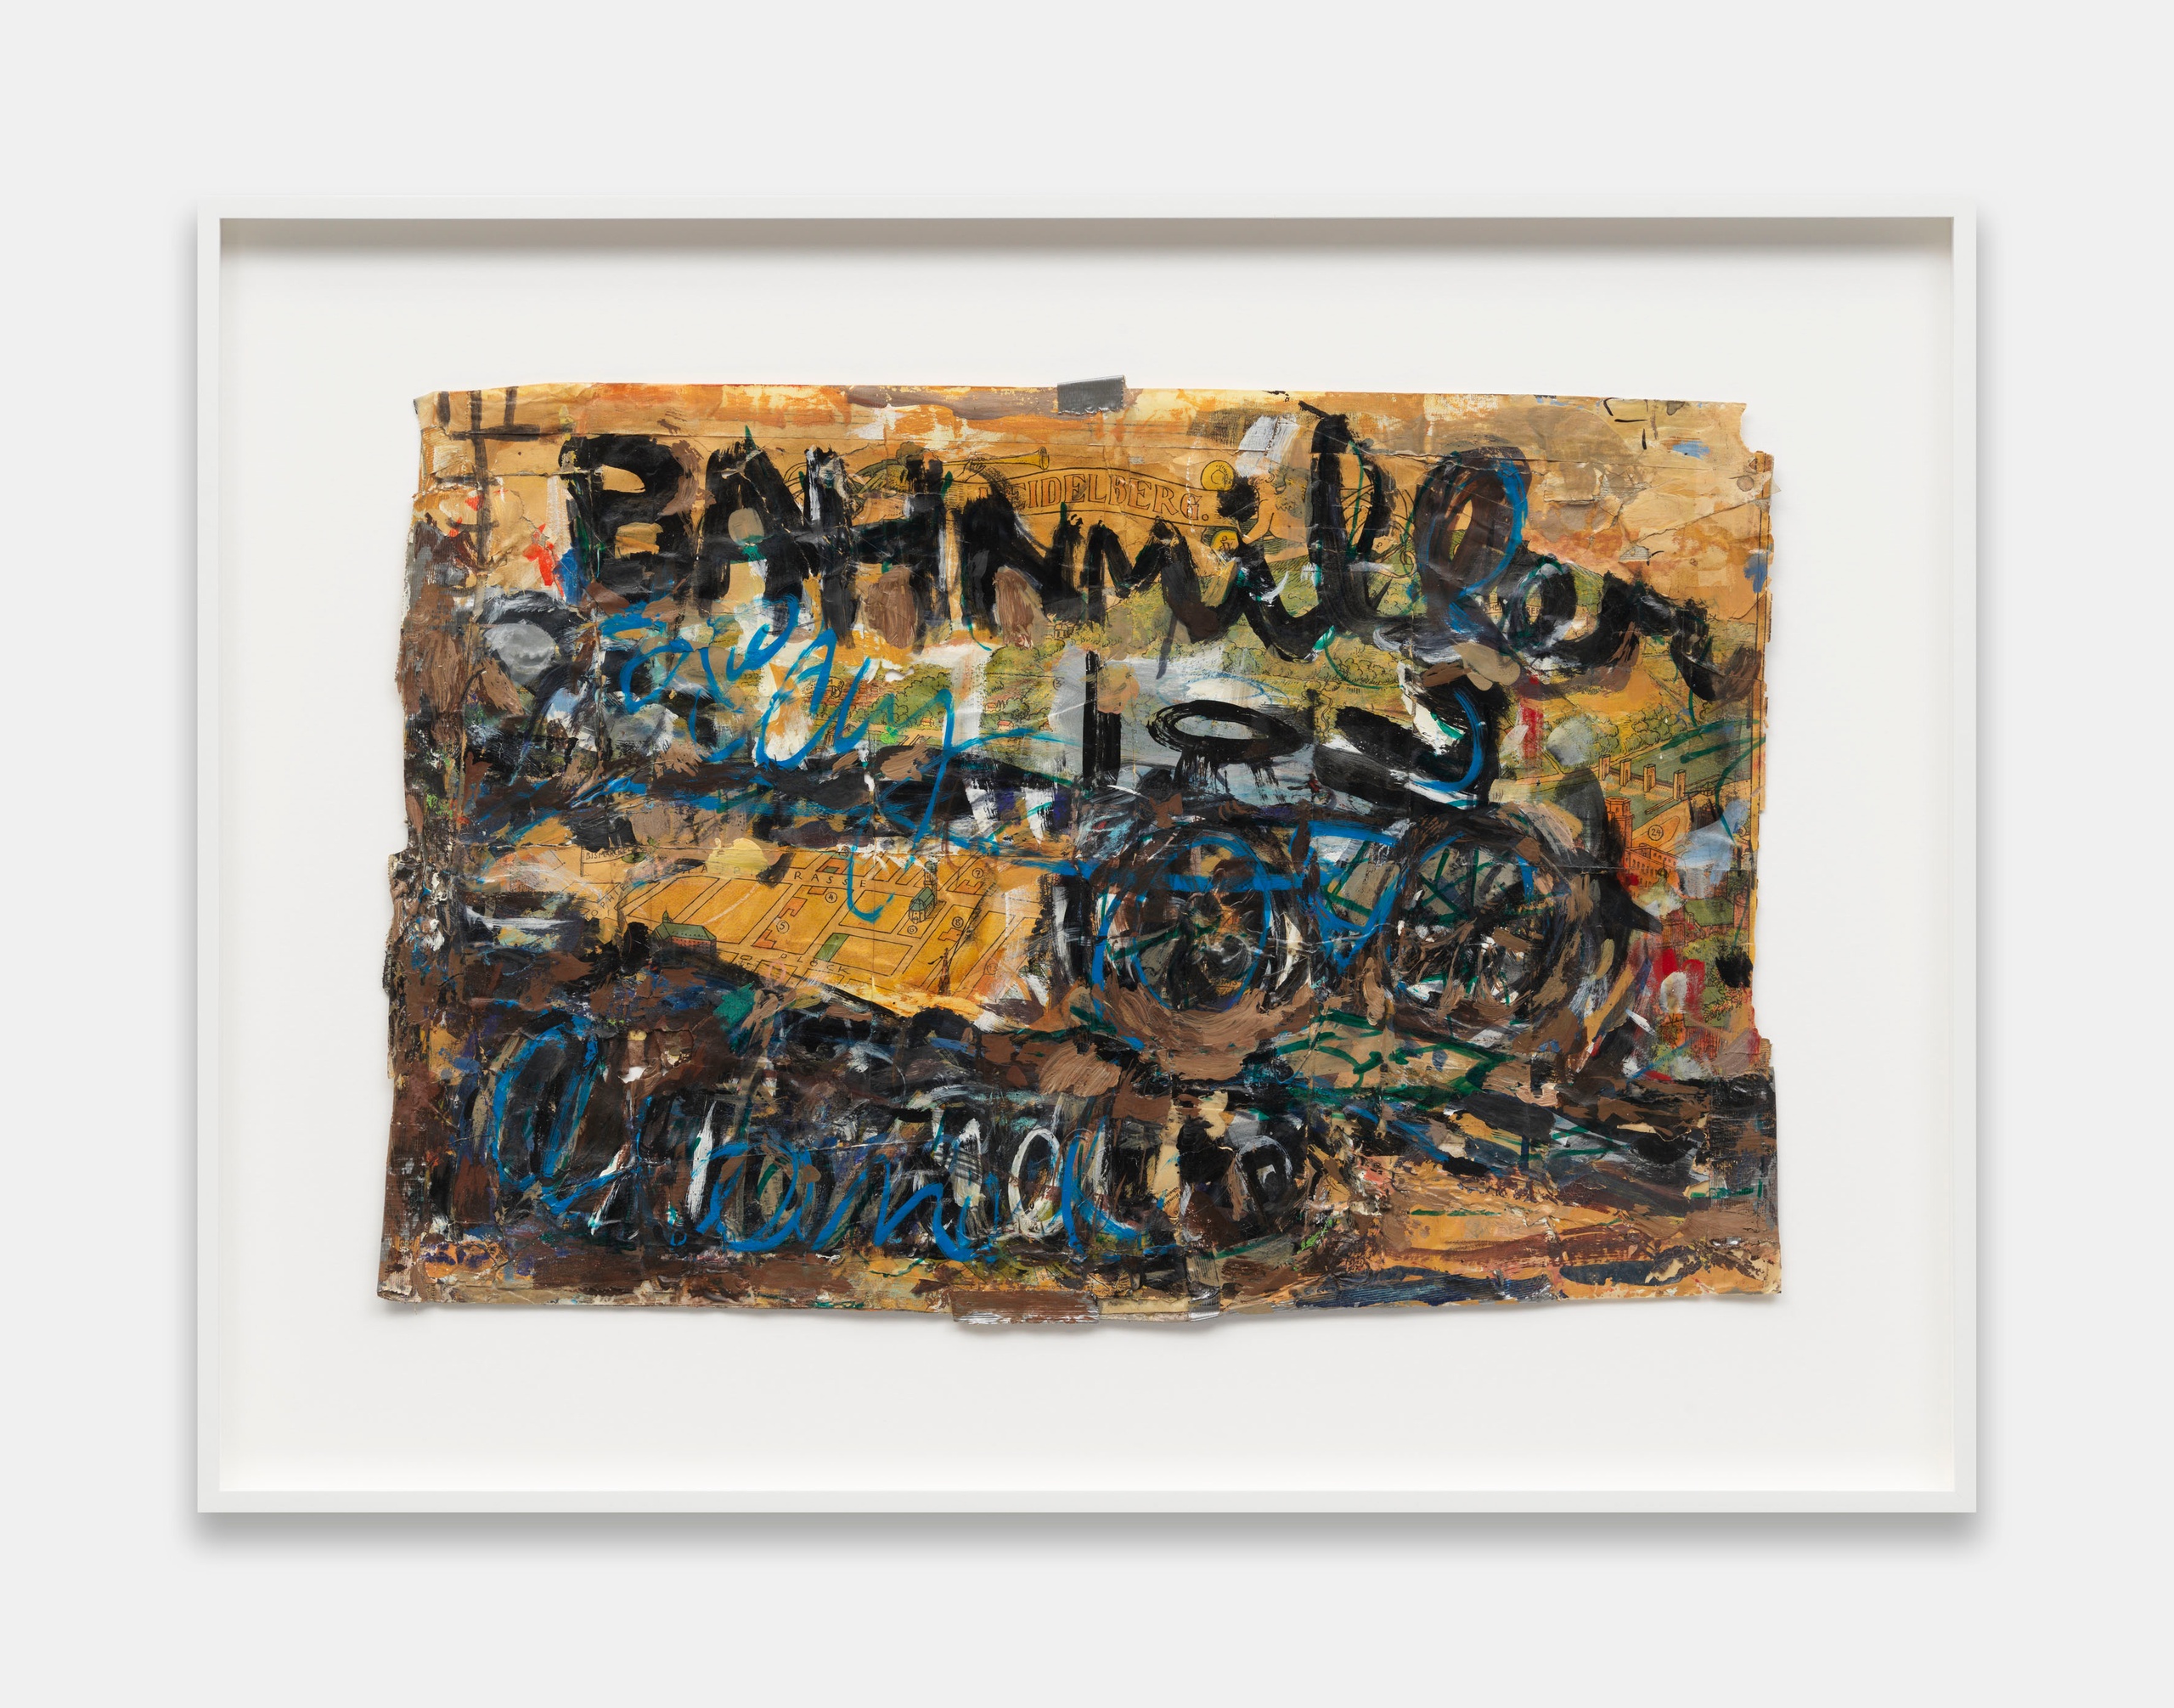 Cay BahnmillerUntitled, 1997oil, latex, adhesive tape, marker, varnish on paper41.3 x 61.3 cm16 1/4 x 24 1/4 in